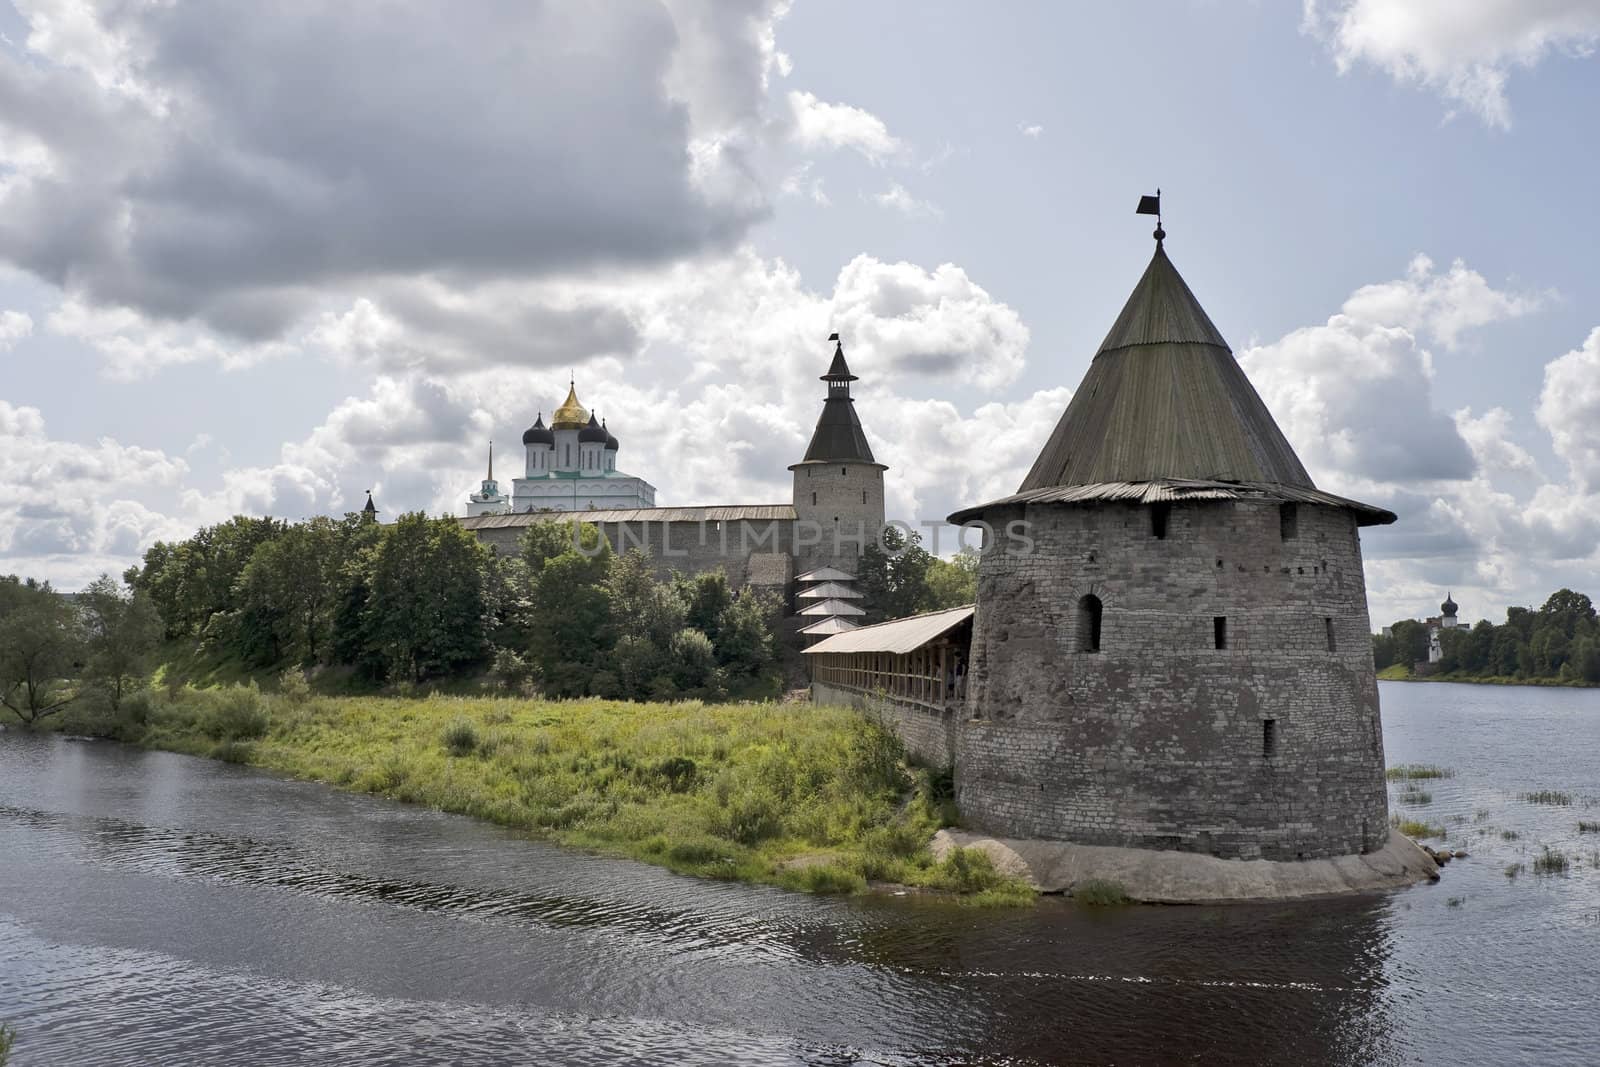 Ancient Pskov land with fortress in rivers crossing